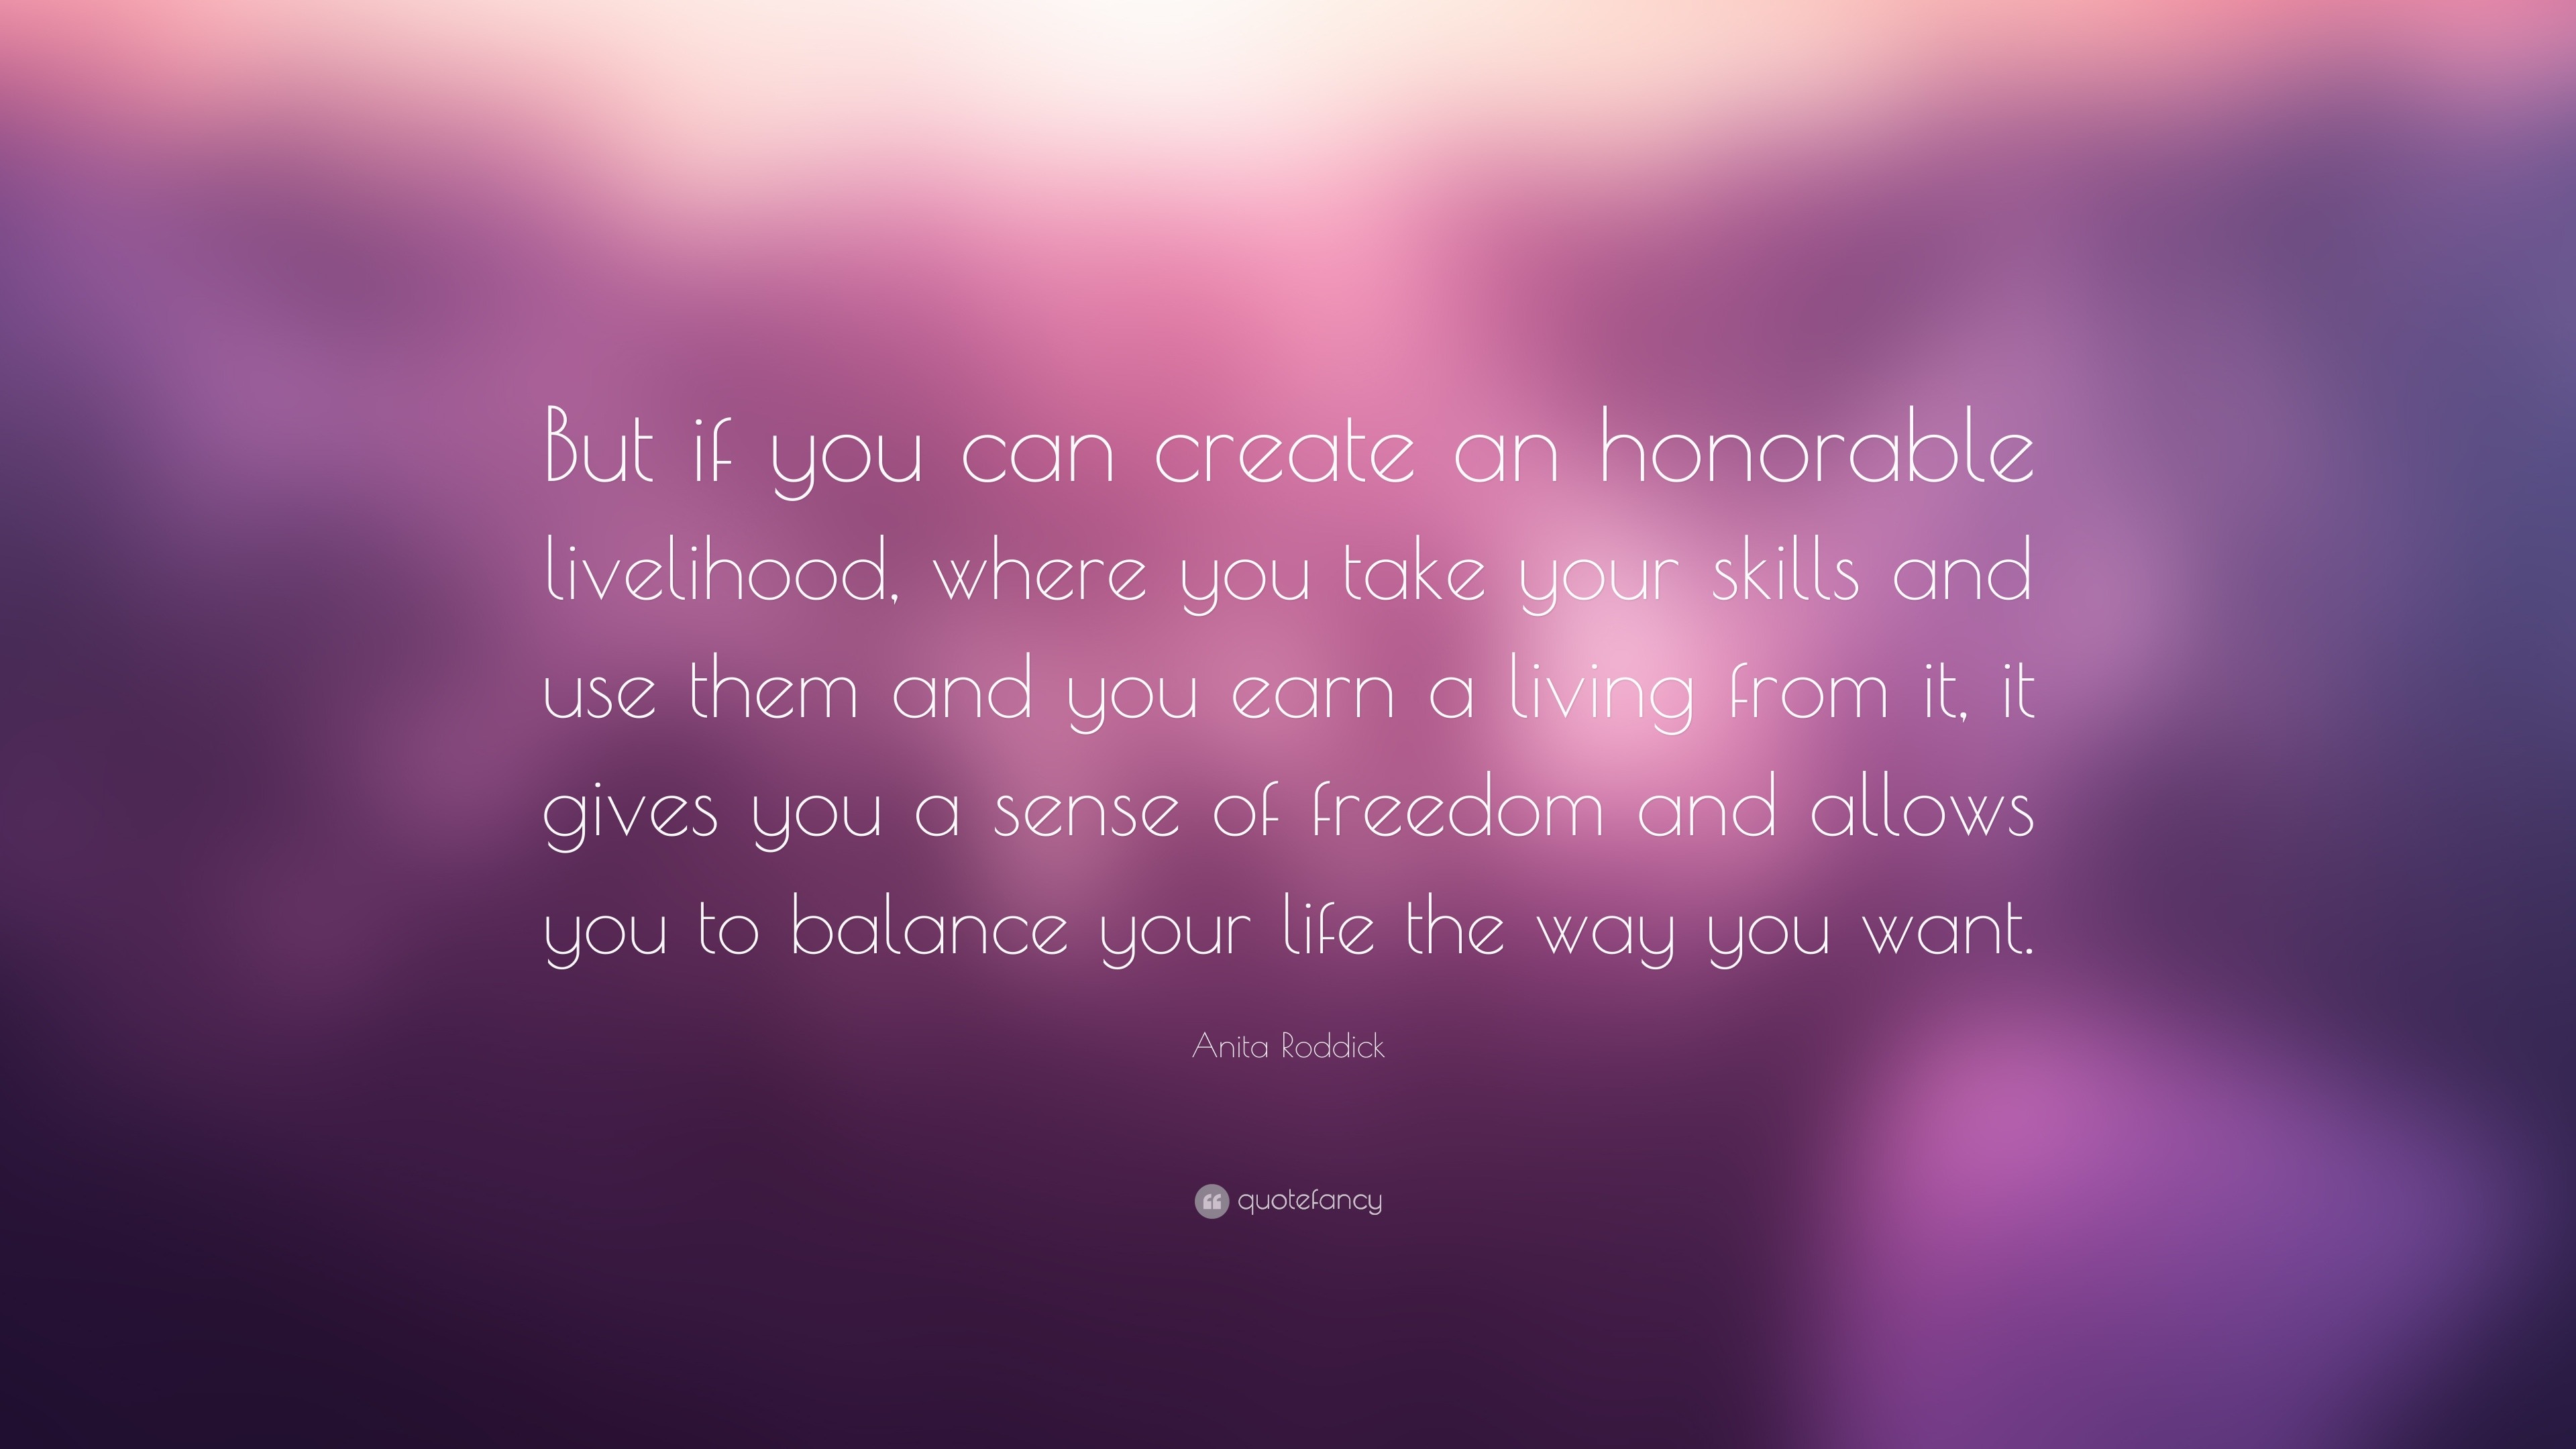 https://quotefancy.com/media/wallpaper/3840x2160/728753-Anita-Roddick-Quote-But-if-you-can-create-an-honorable-livelihood.jpg